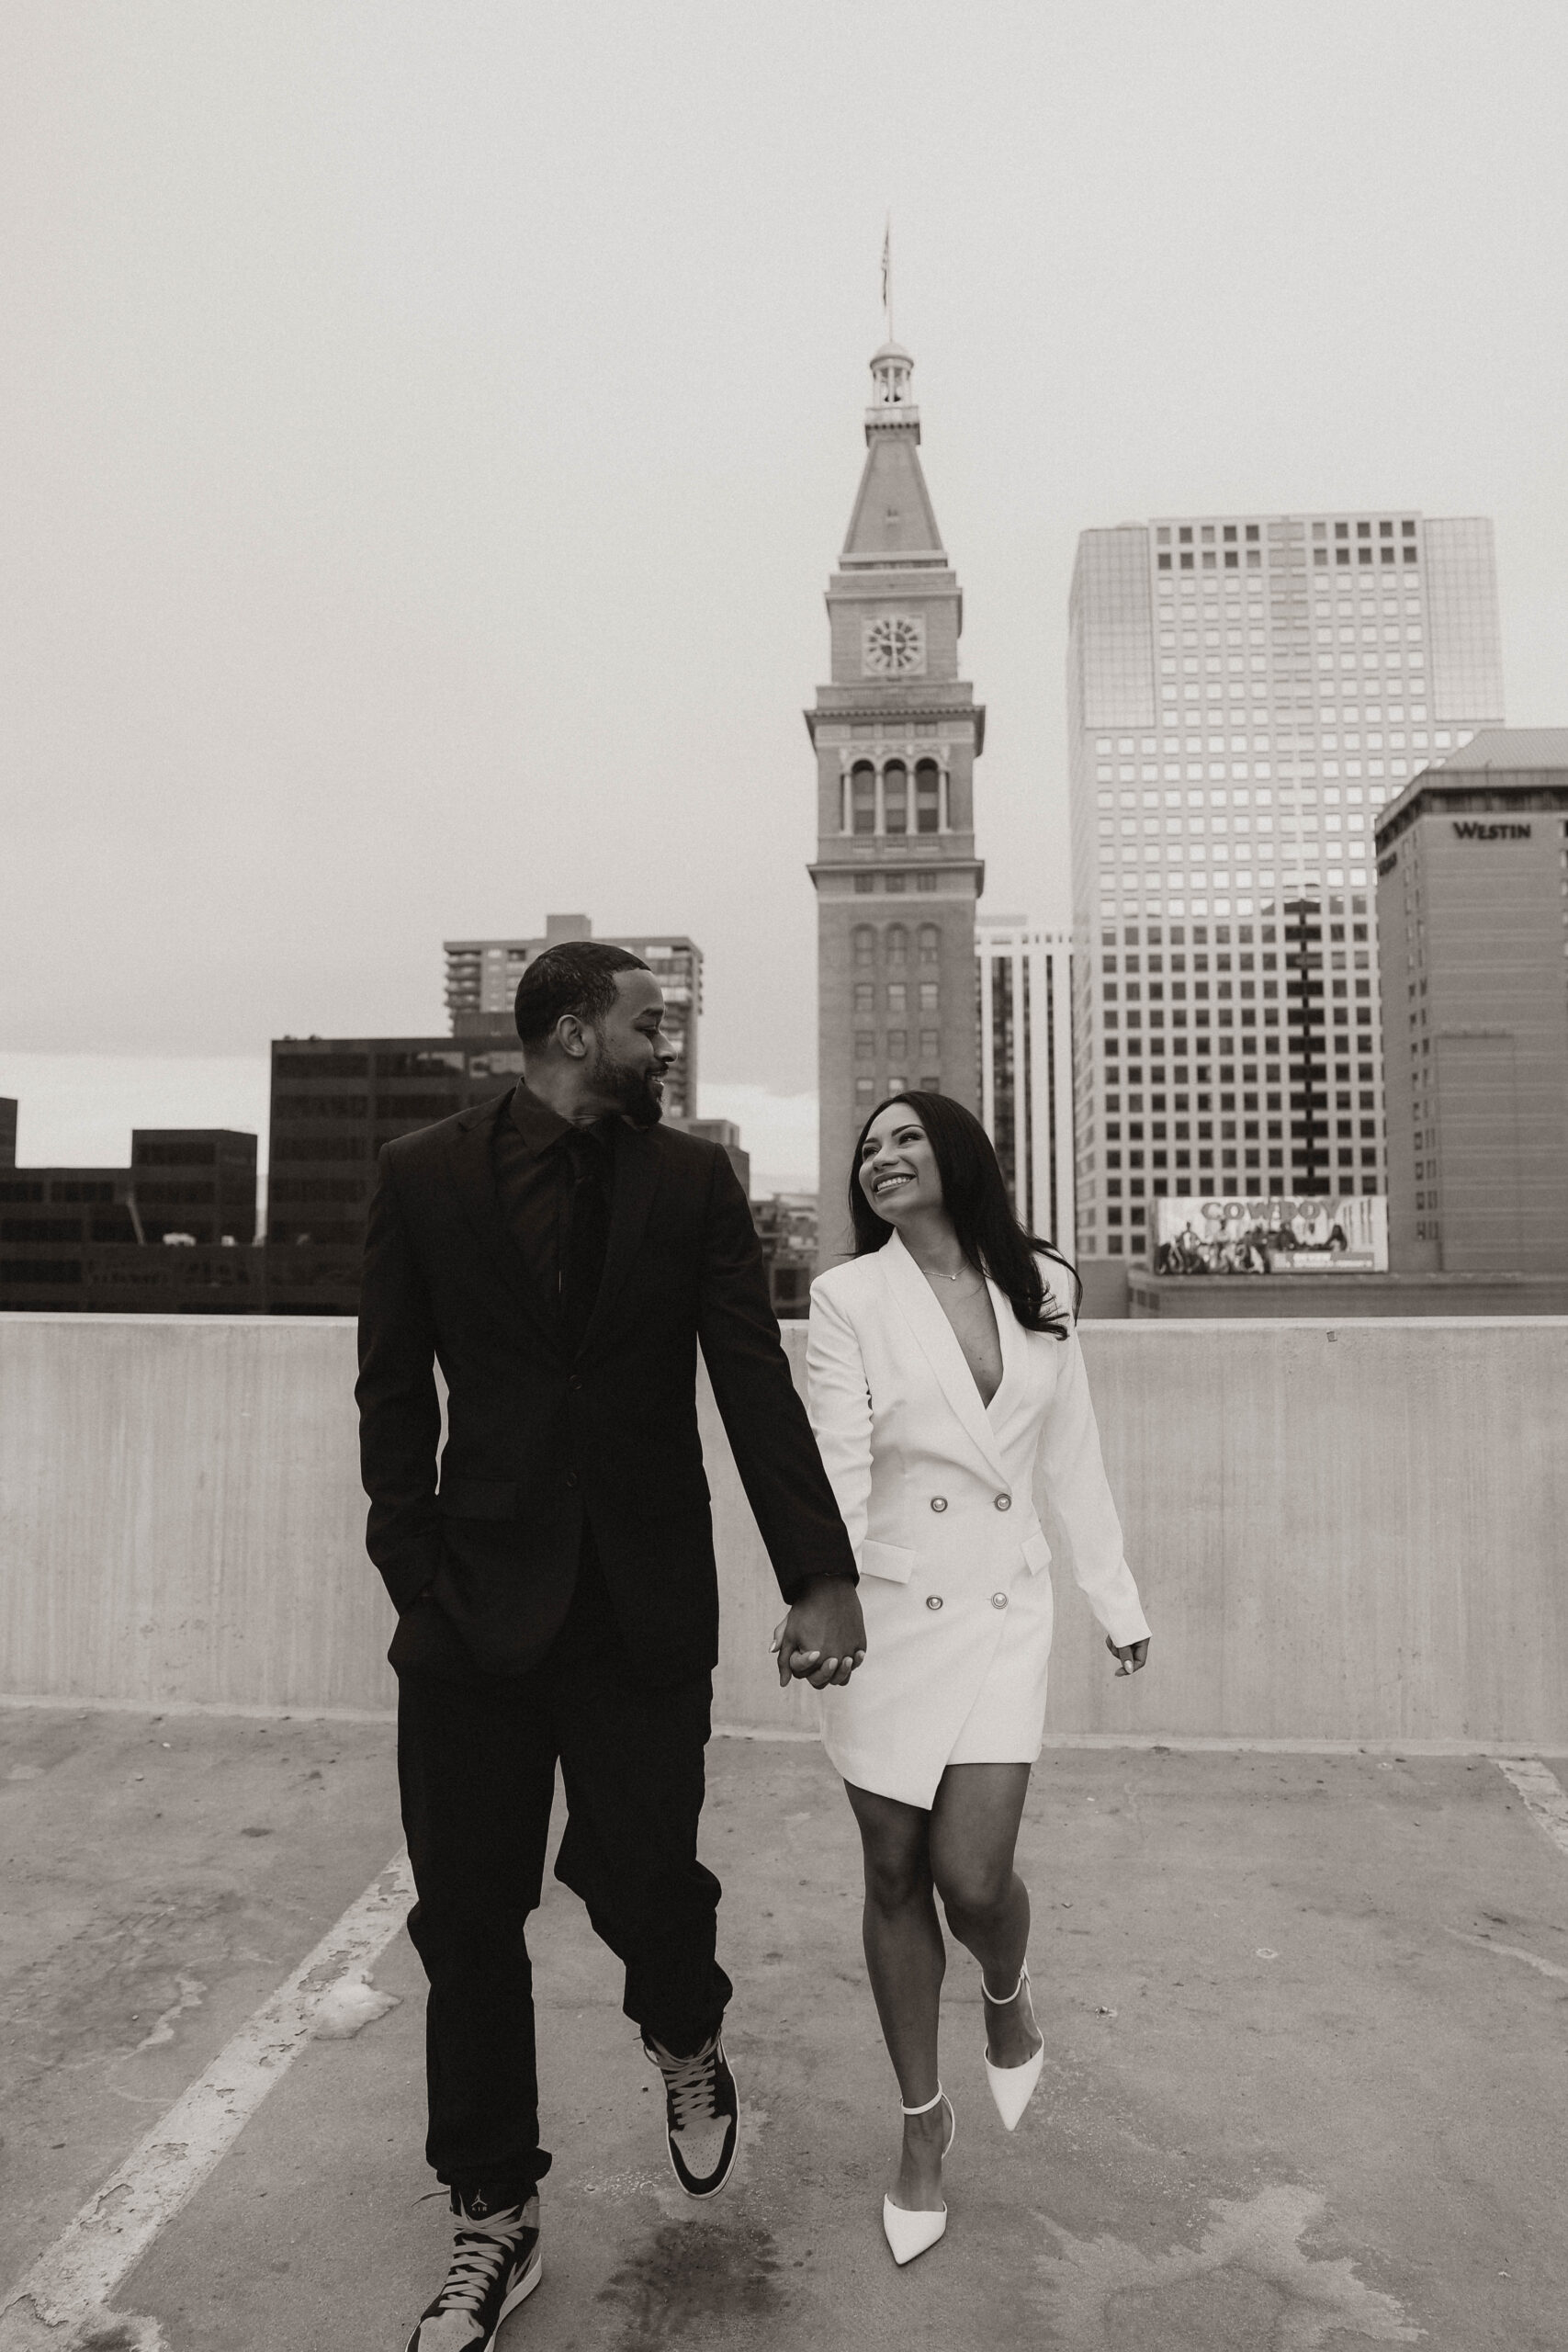 engaged couple in formal wear on a rooftop walking together expressing their unique engagement shoot ideas